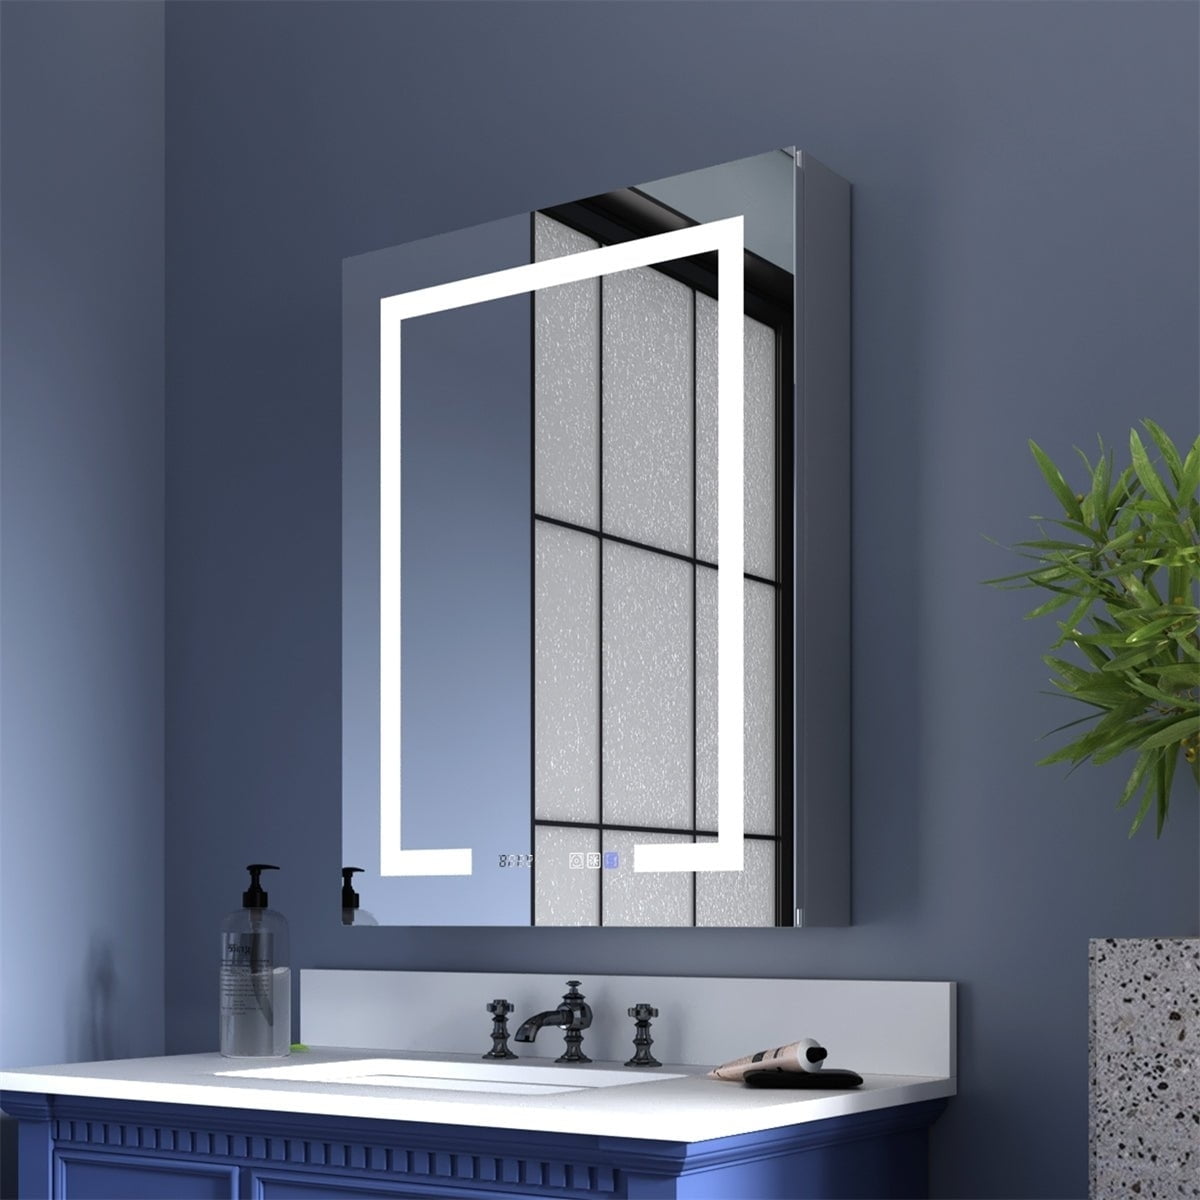 ExBrite 36 inch W x 32 inch H LED Lighted Mirror Black Medicine Cabinet with Shelves for Bathroom Recessed or Surface Mount, Size: 1 in